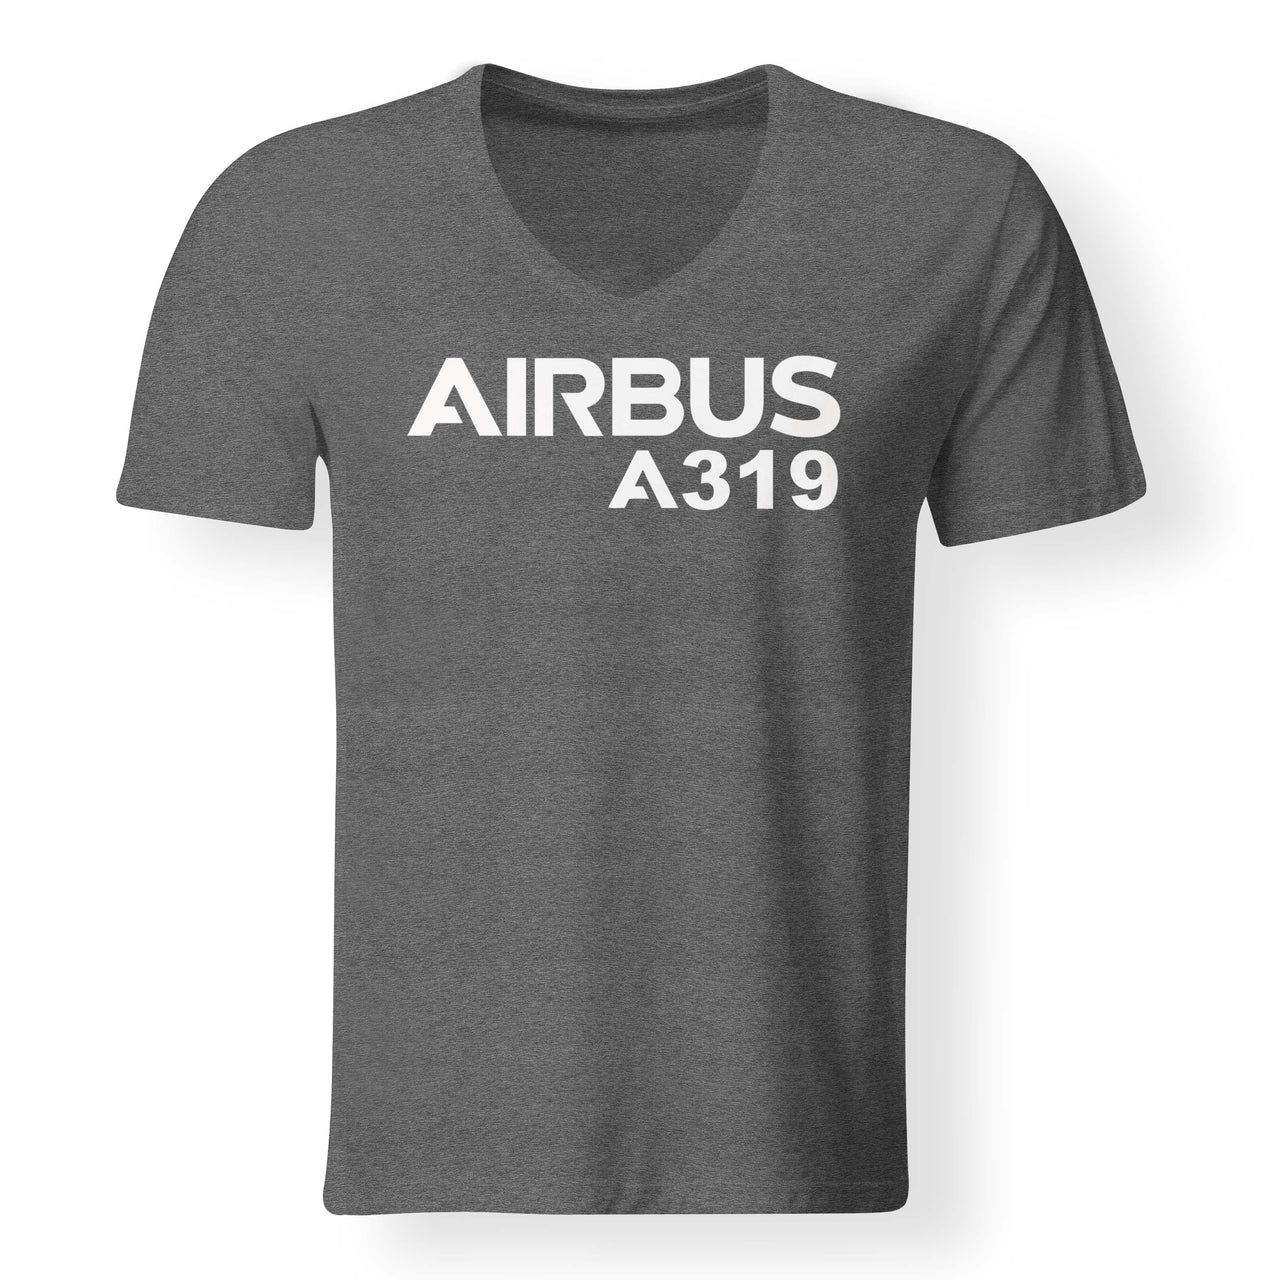 Airbus A319 & Text Designed V-Neck T-Shirts